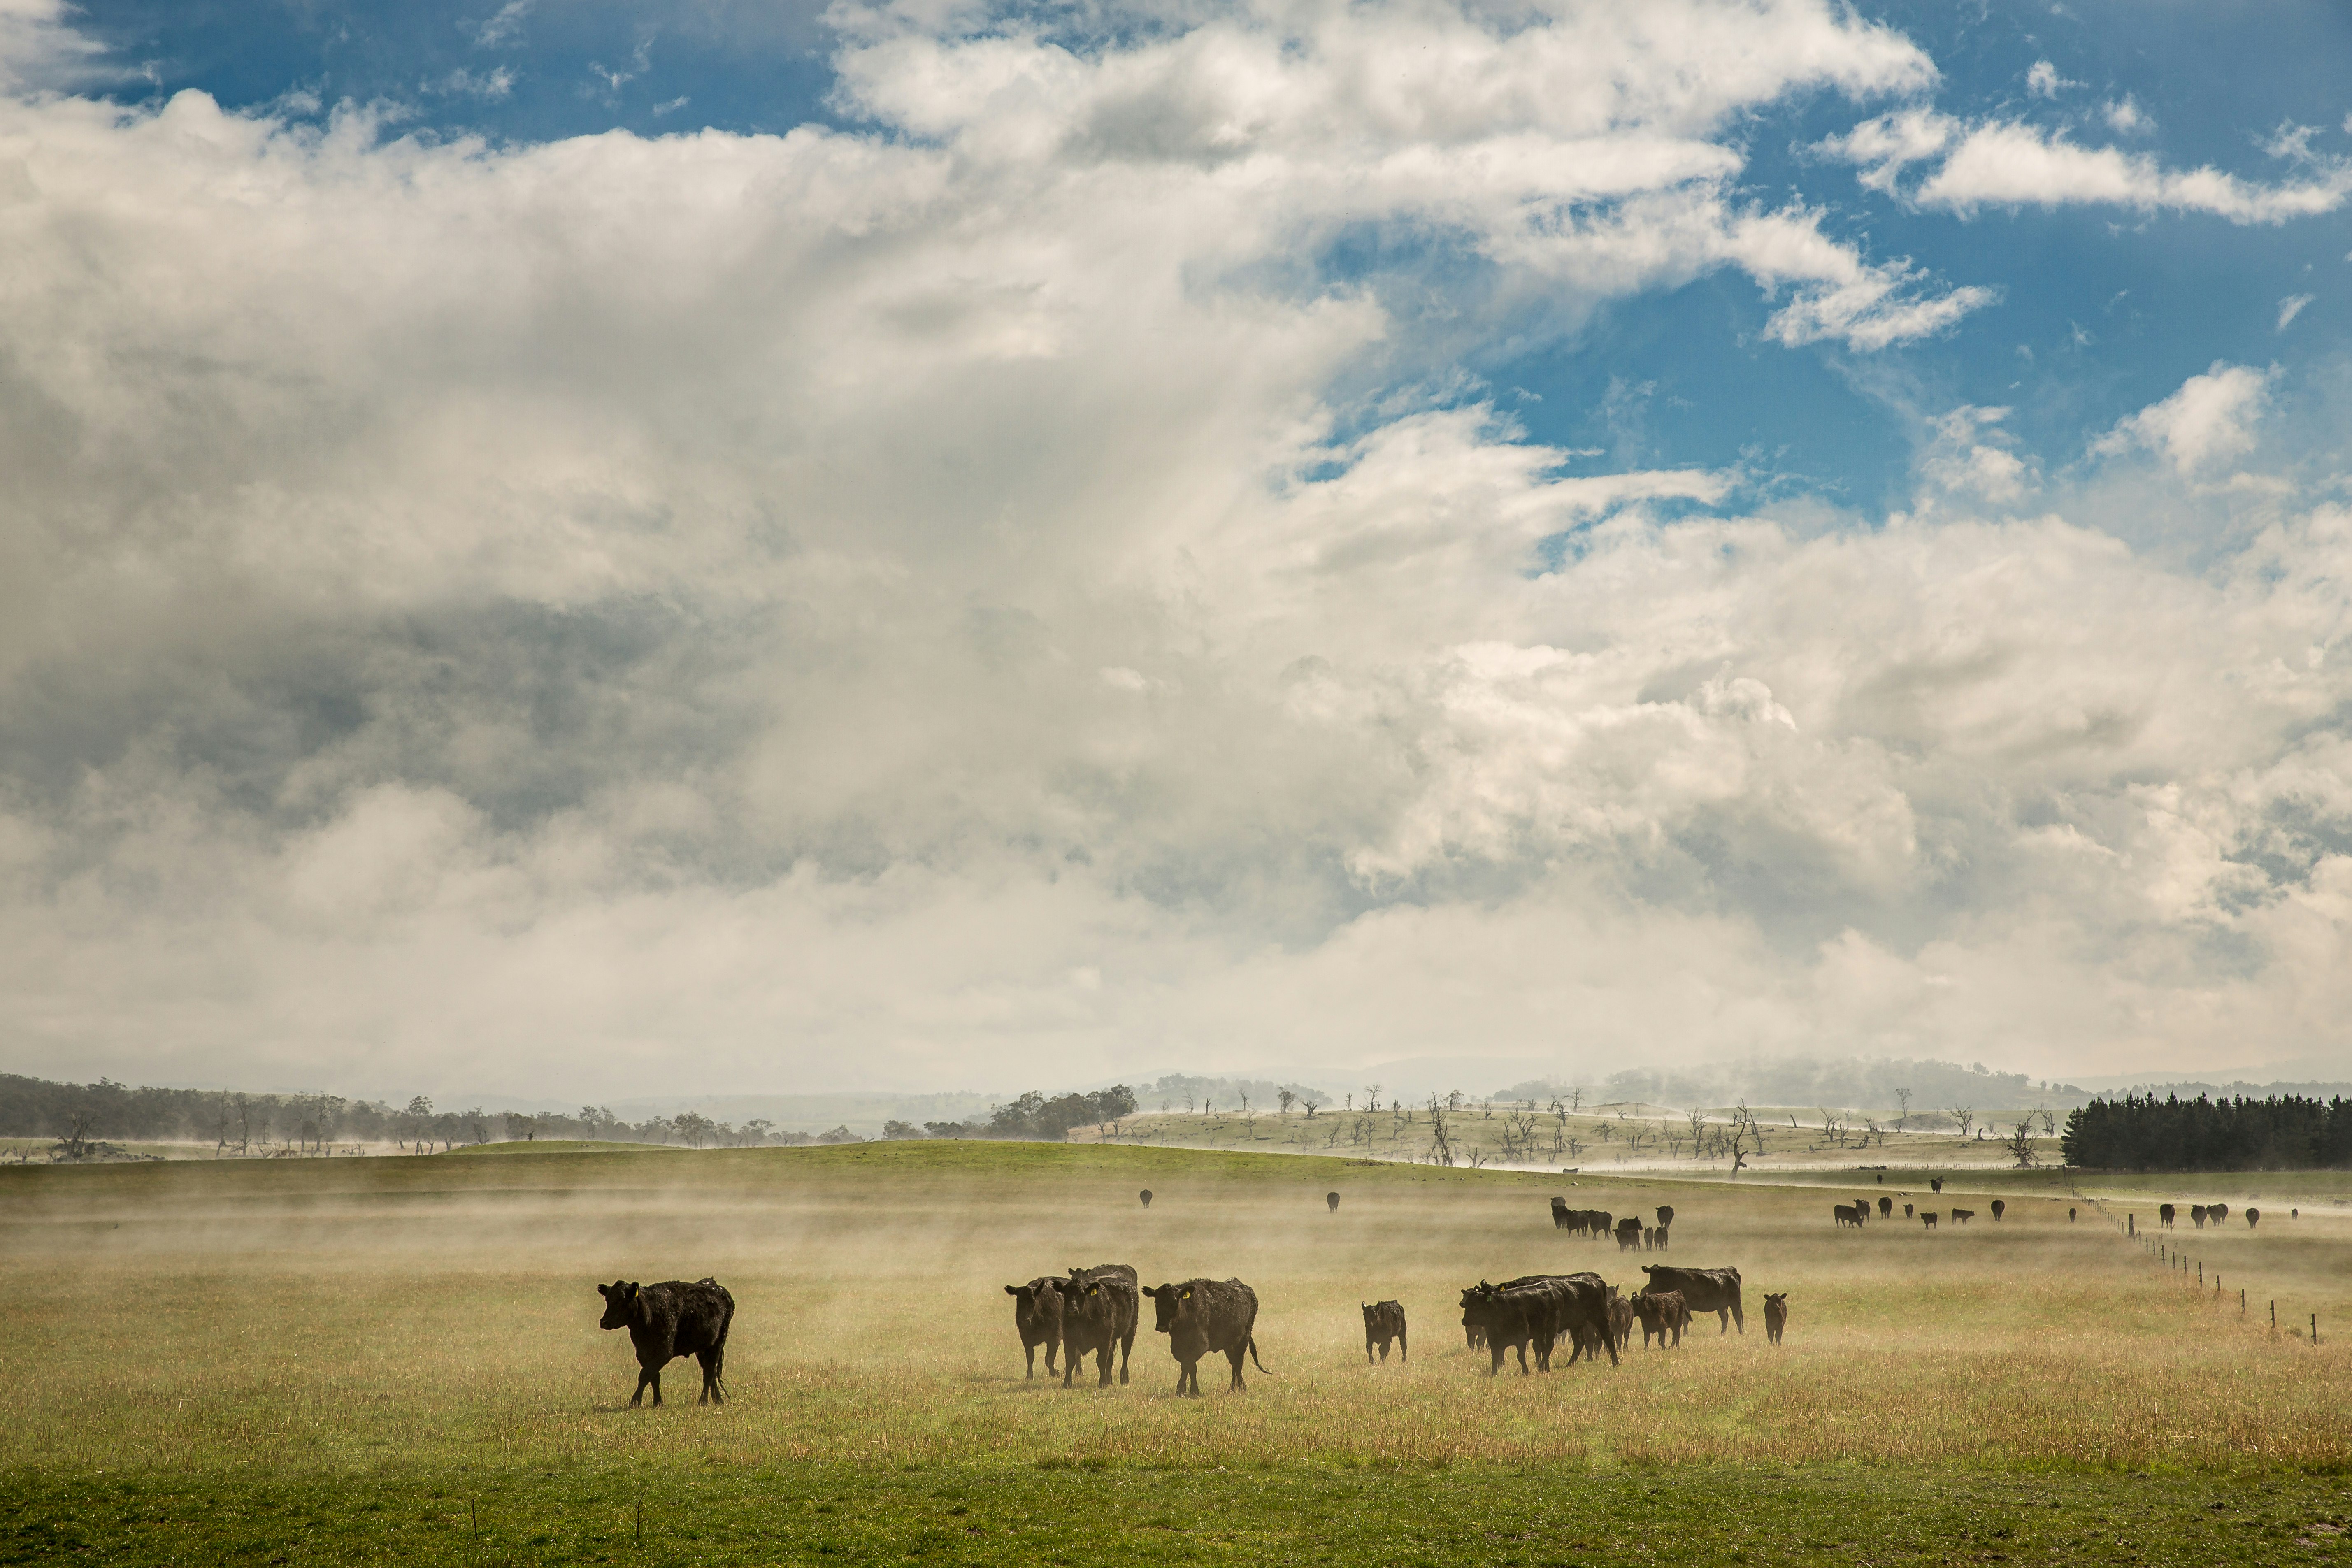 herd of horses on green grass field under white clouds and blue sky during daytime